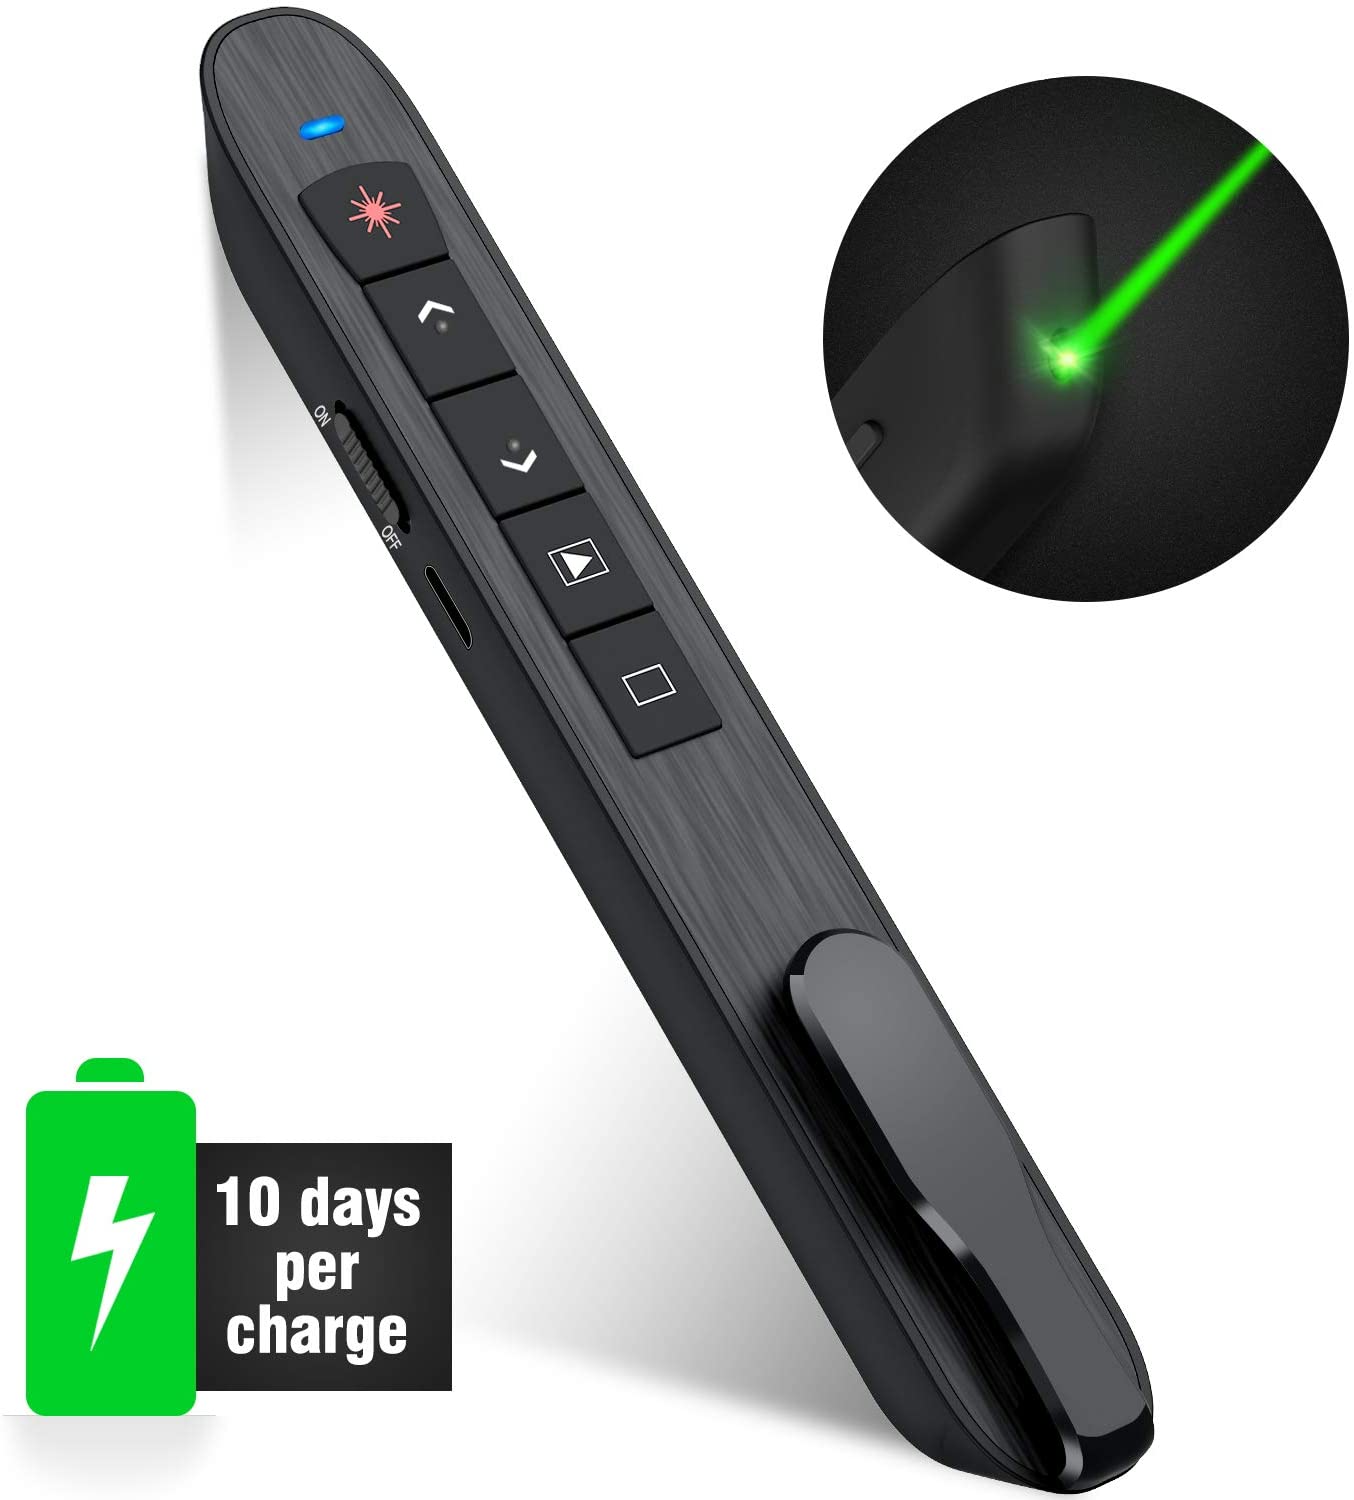 DinoFire Wireless Presenter Remote with Green Light, Rechargeable PowerPoint 